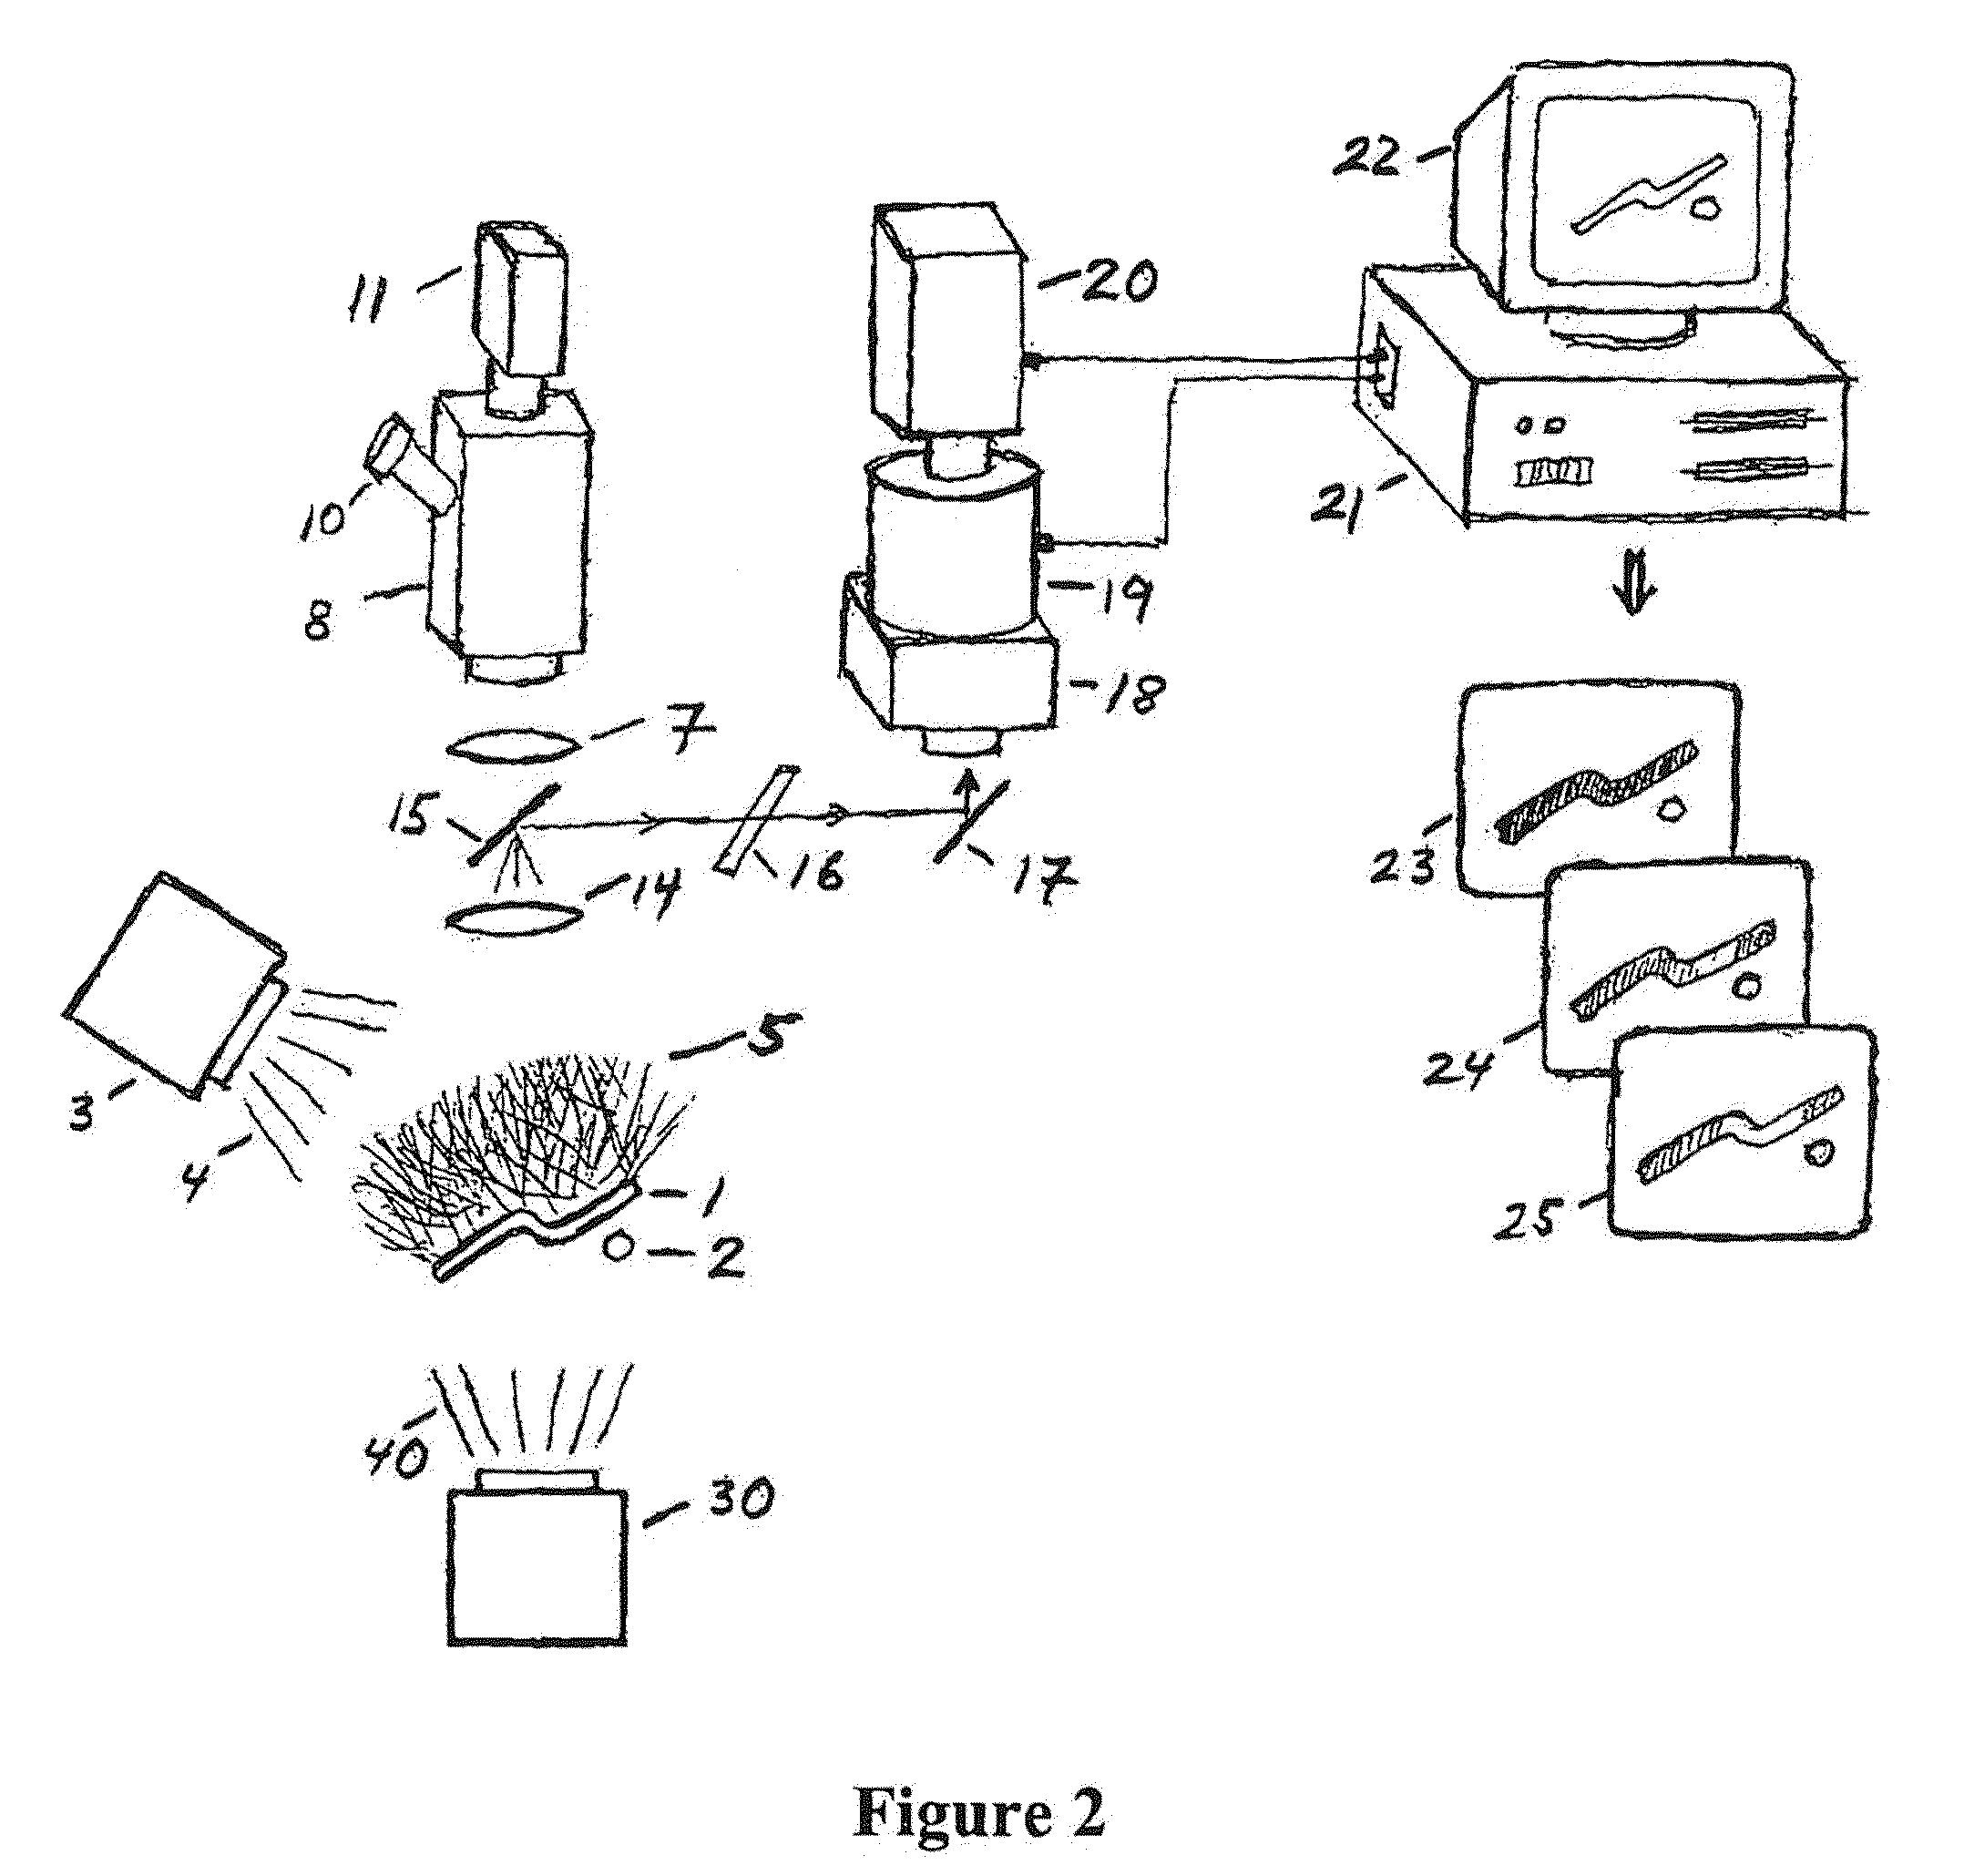 System and Method for Improved Forensic Analysis